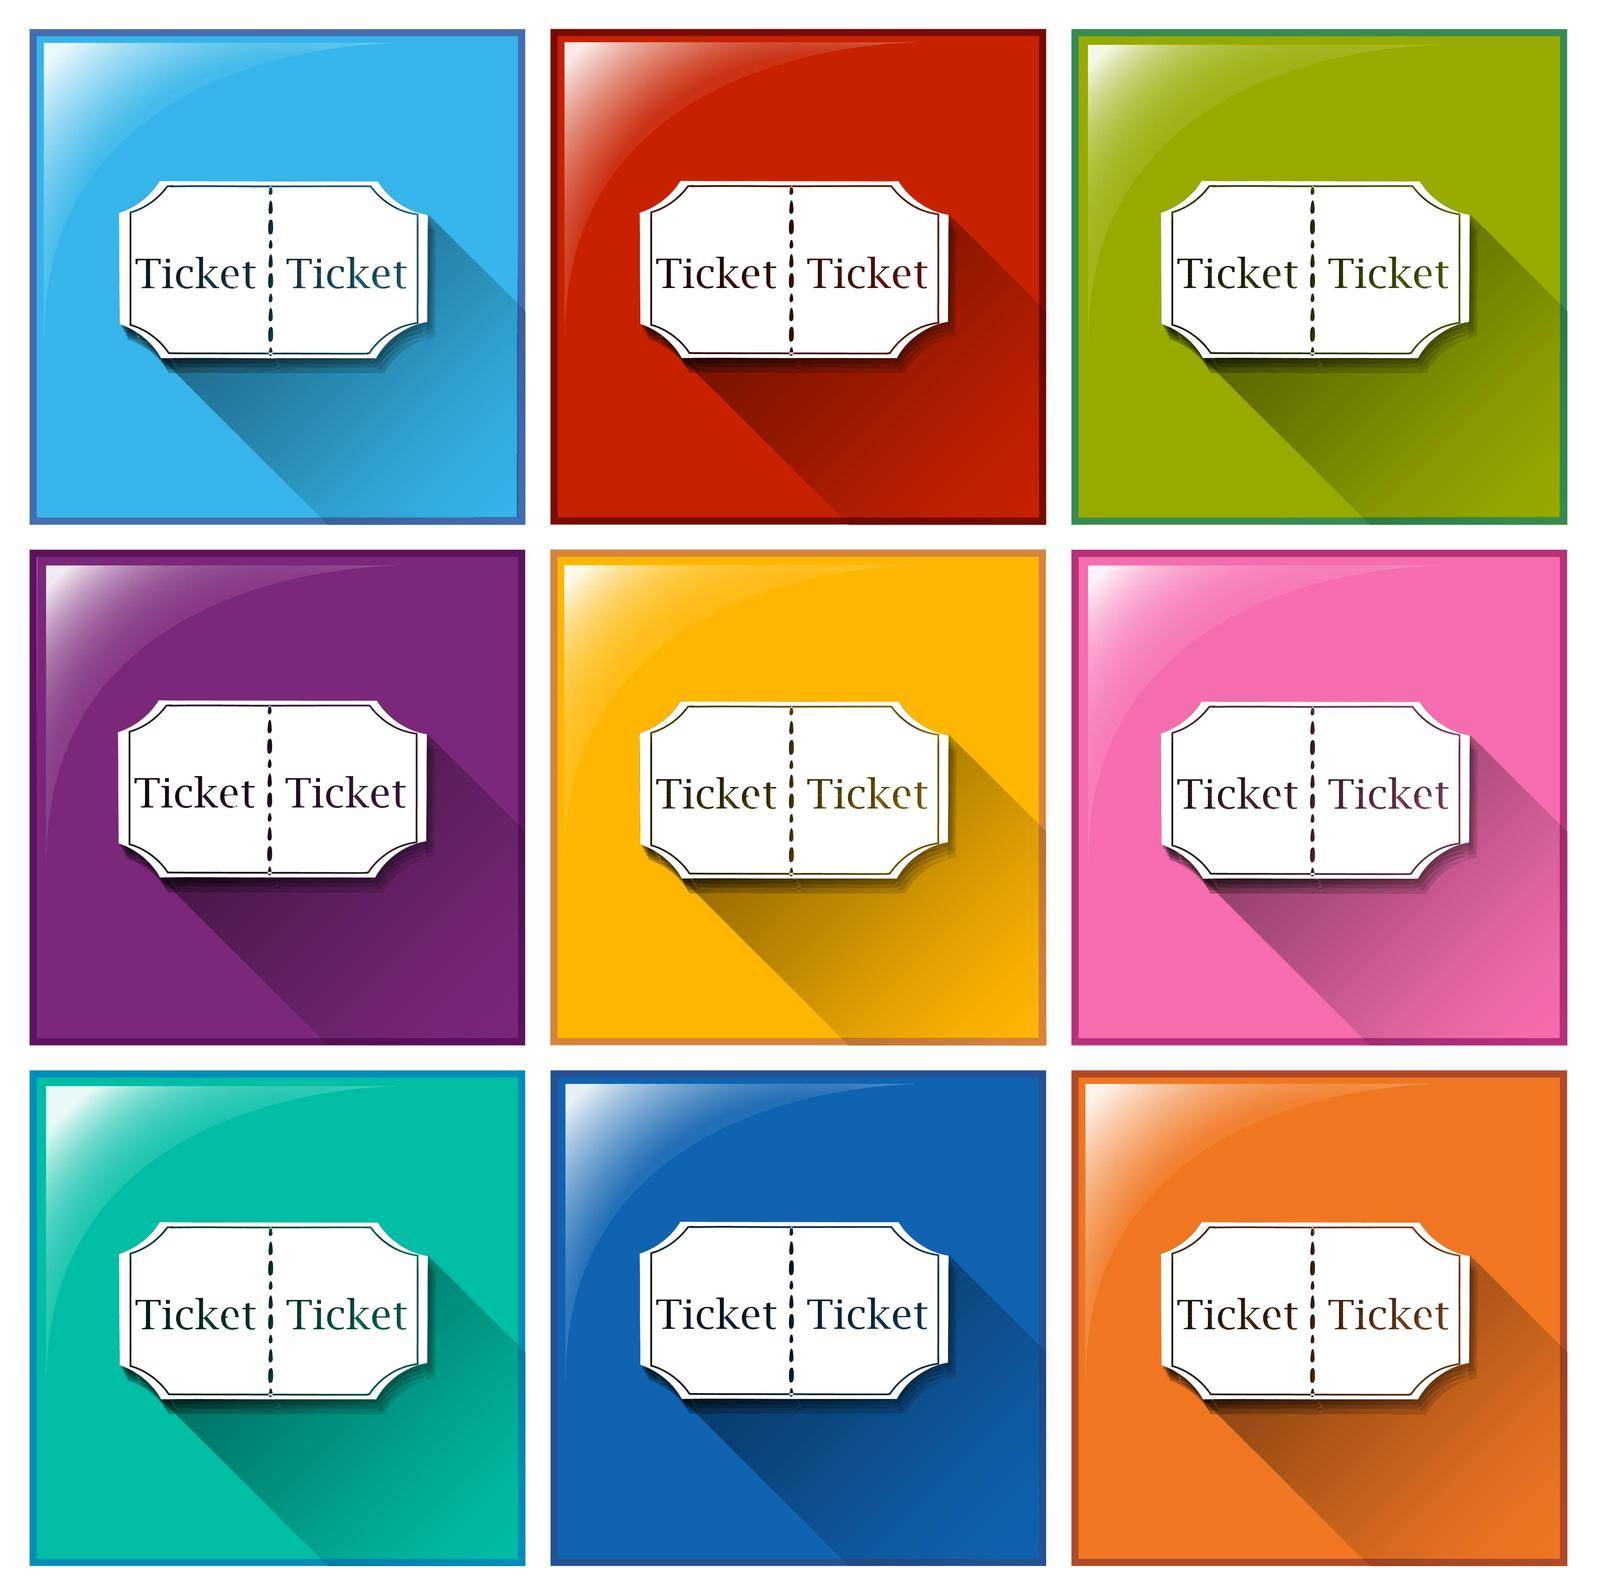 Buttons with tickets by iimages